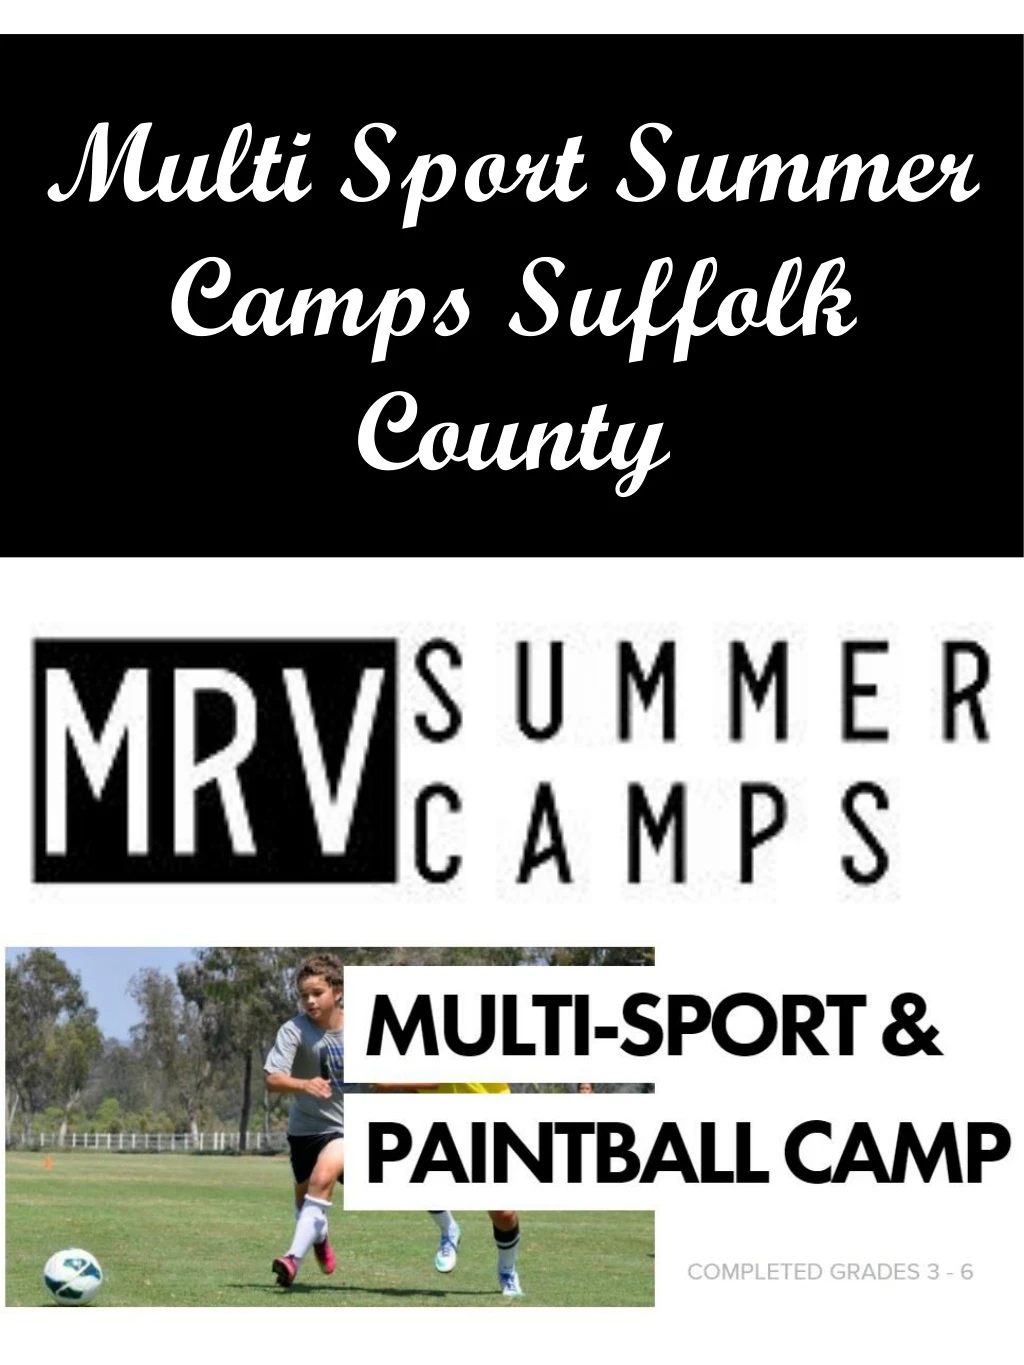 multi sport summer camps suffolk county